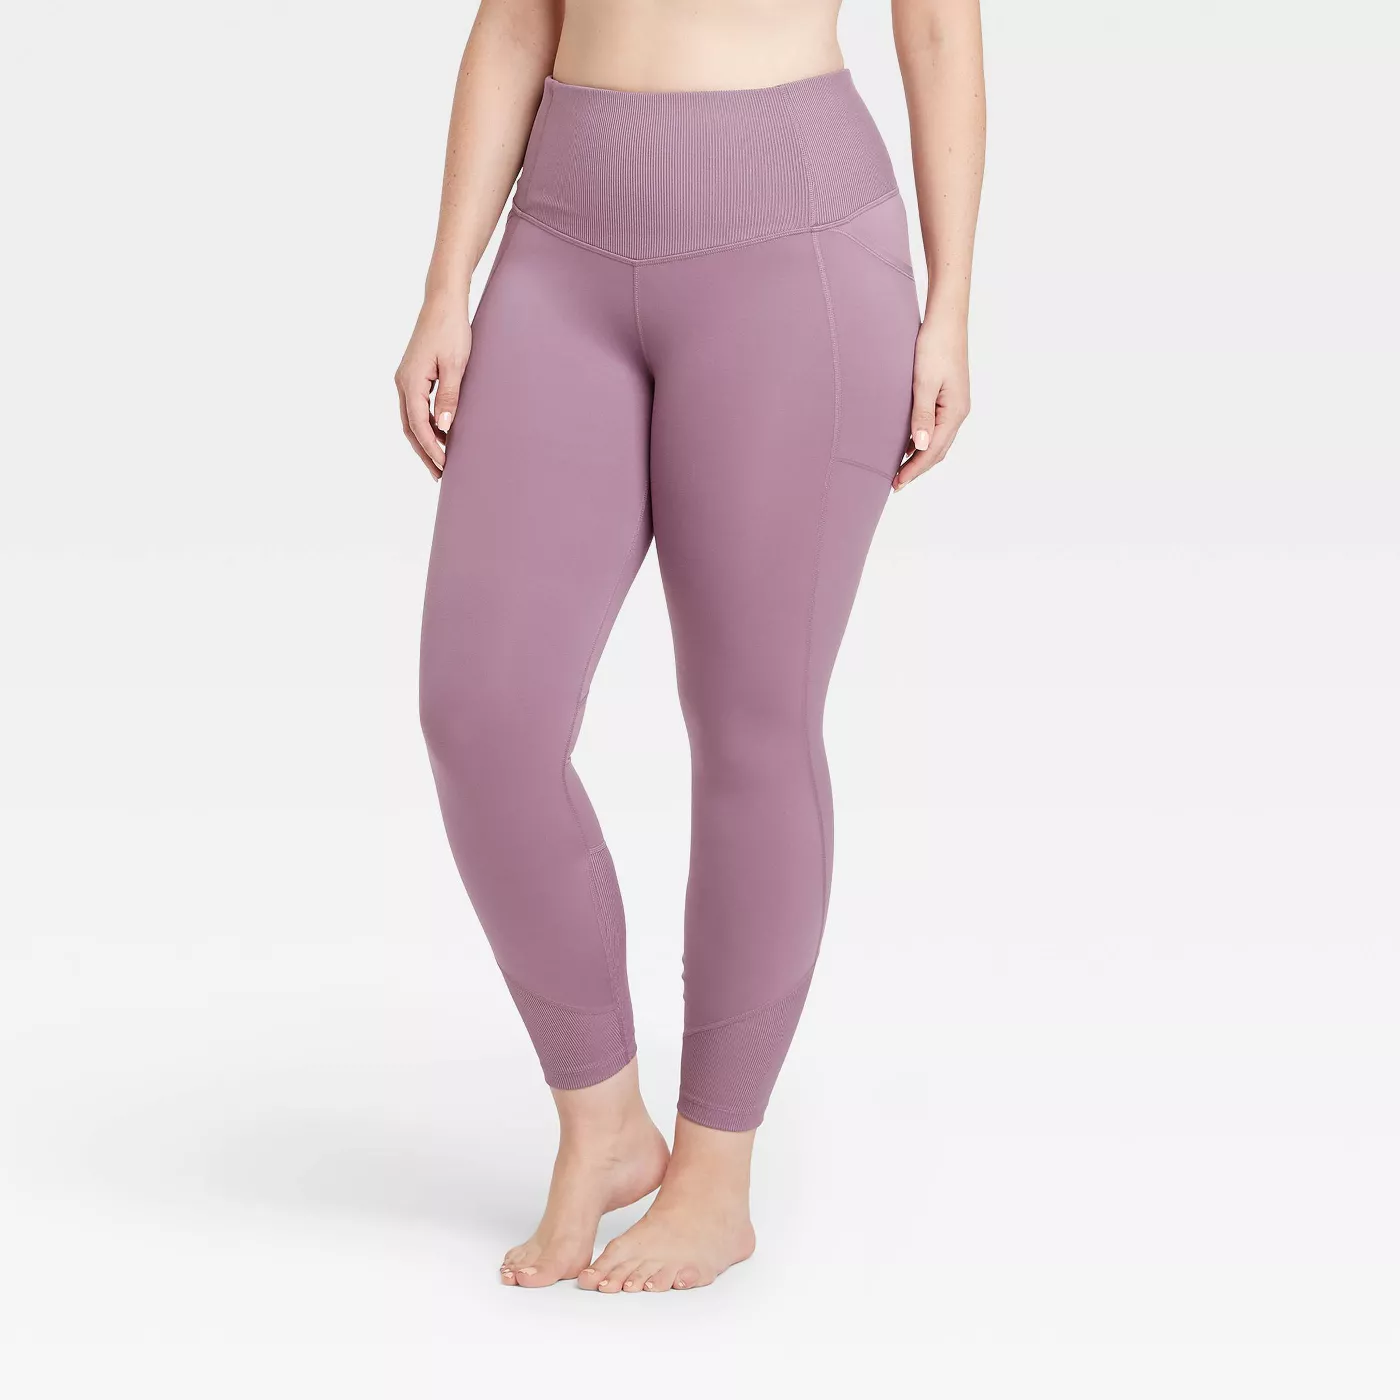 CRZ YOGA Women's Seamless Workout Leggings 25 Inches - Ribbed High